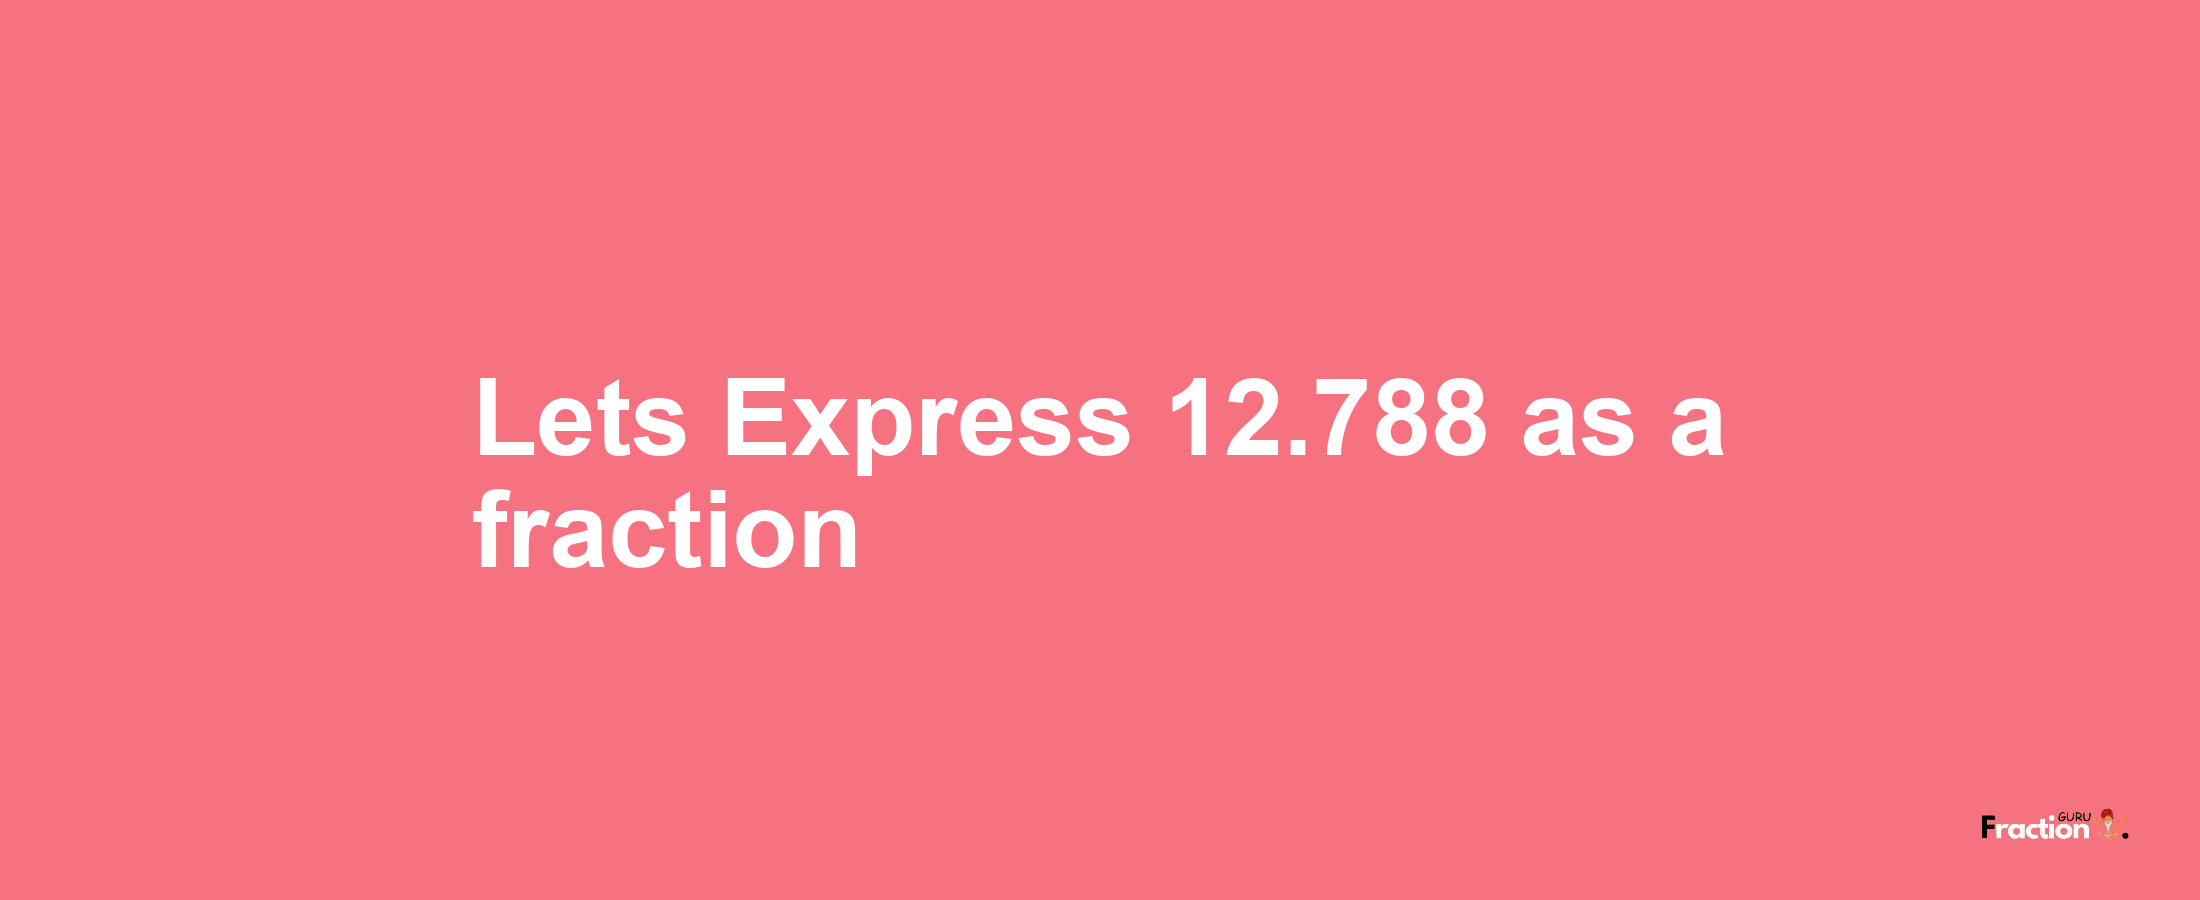 Lets Express 12.788 as afraction